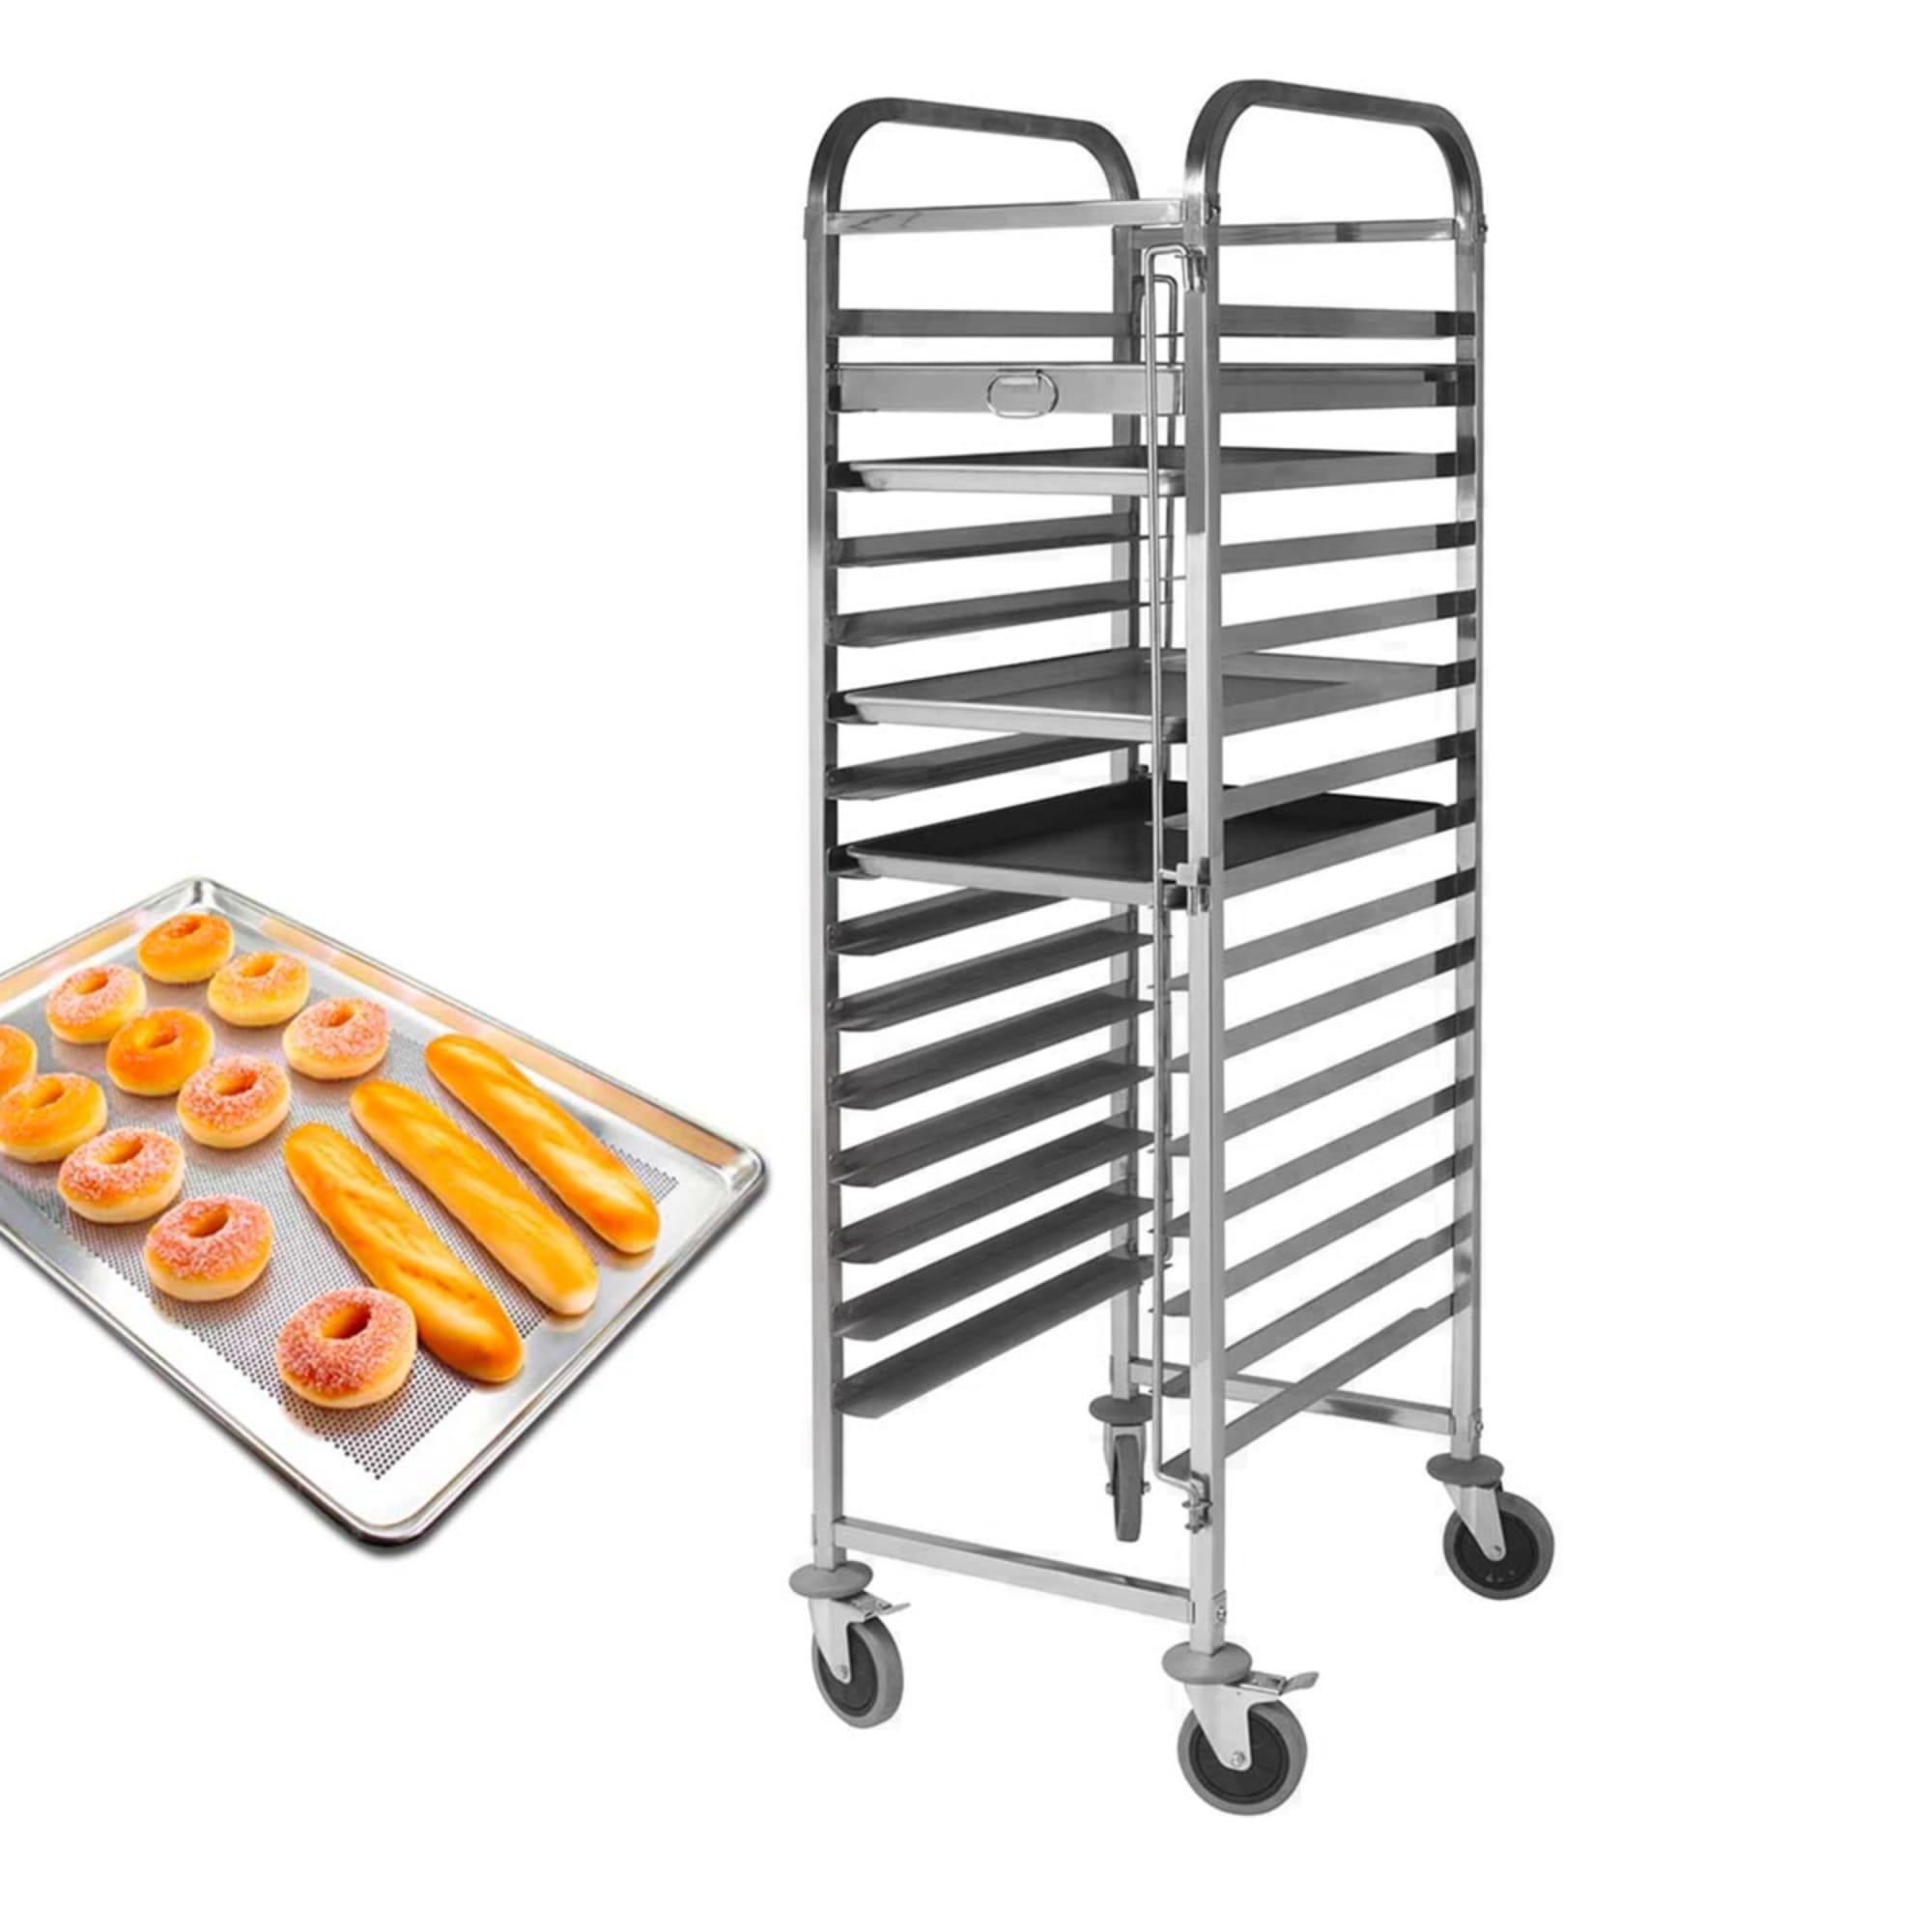 Soga Stainless Steel Gastronorm Trolley 16 Tier Suits 60x40cm Trays Image 3